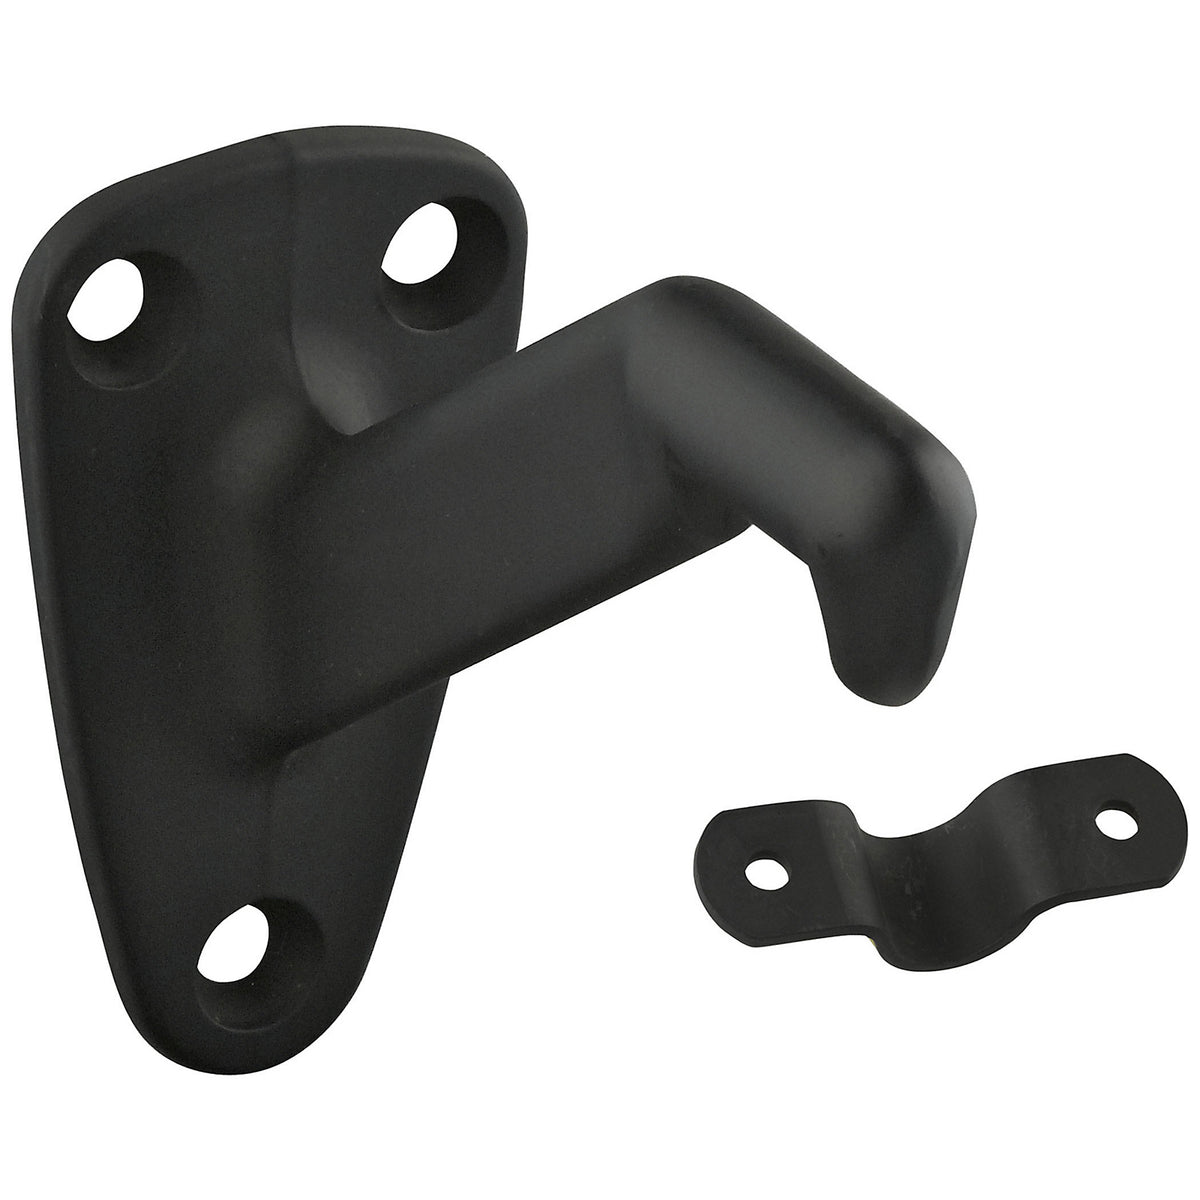 buy hand rail brackets & home finish hardware at cheap rate in bulk. wholesale & retail hardware repair tools store. home décor ideas, maintenance, repair replacement parts